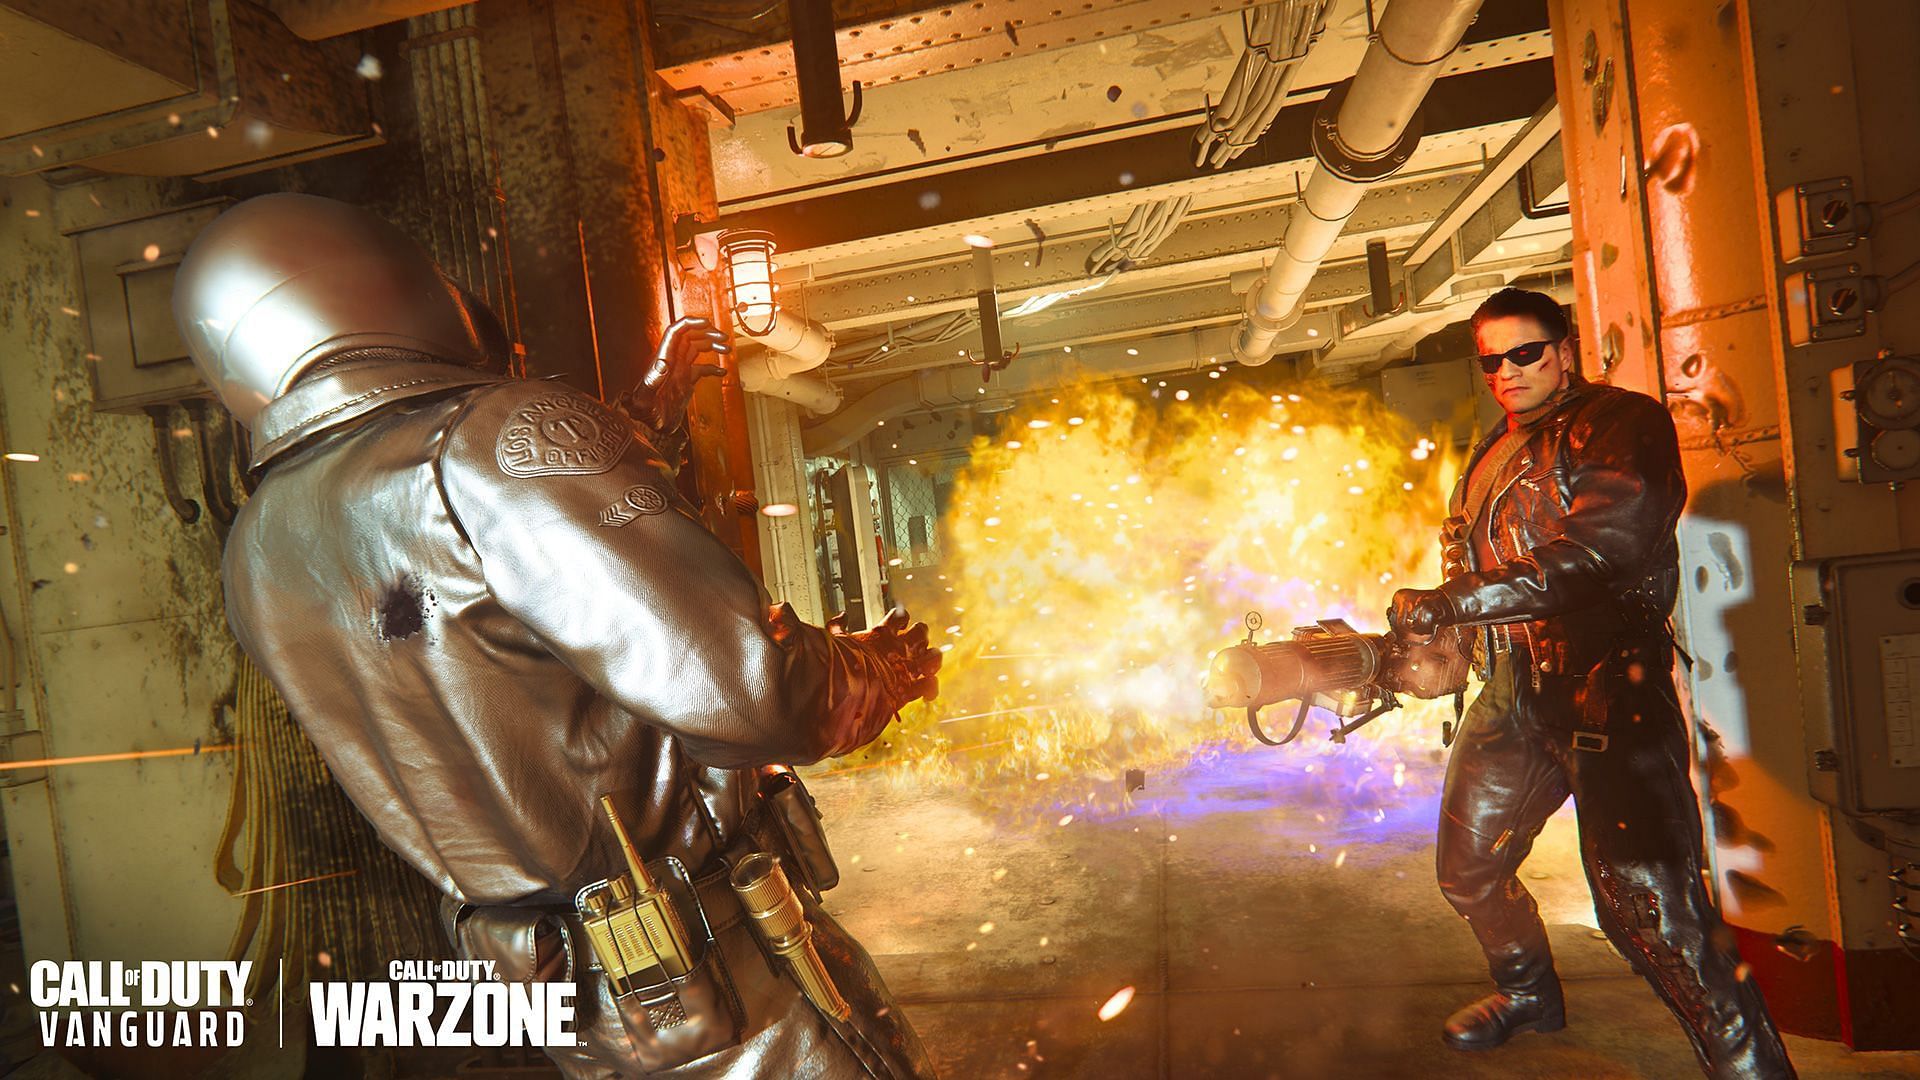 A Terminator crossover is coming to Warzone and Vanguard Season 4 Reloaded (Image via Activision)